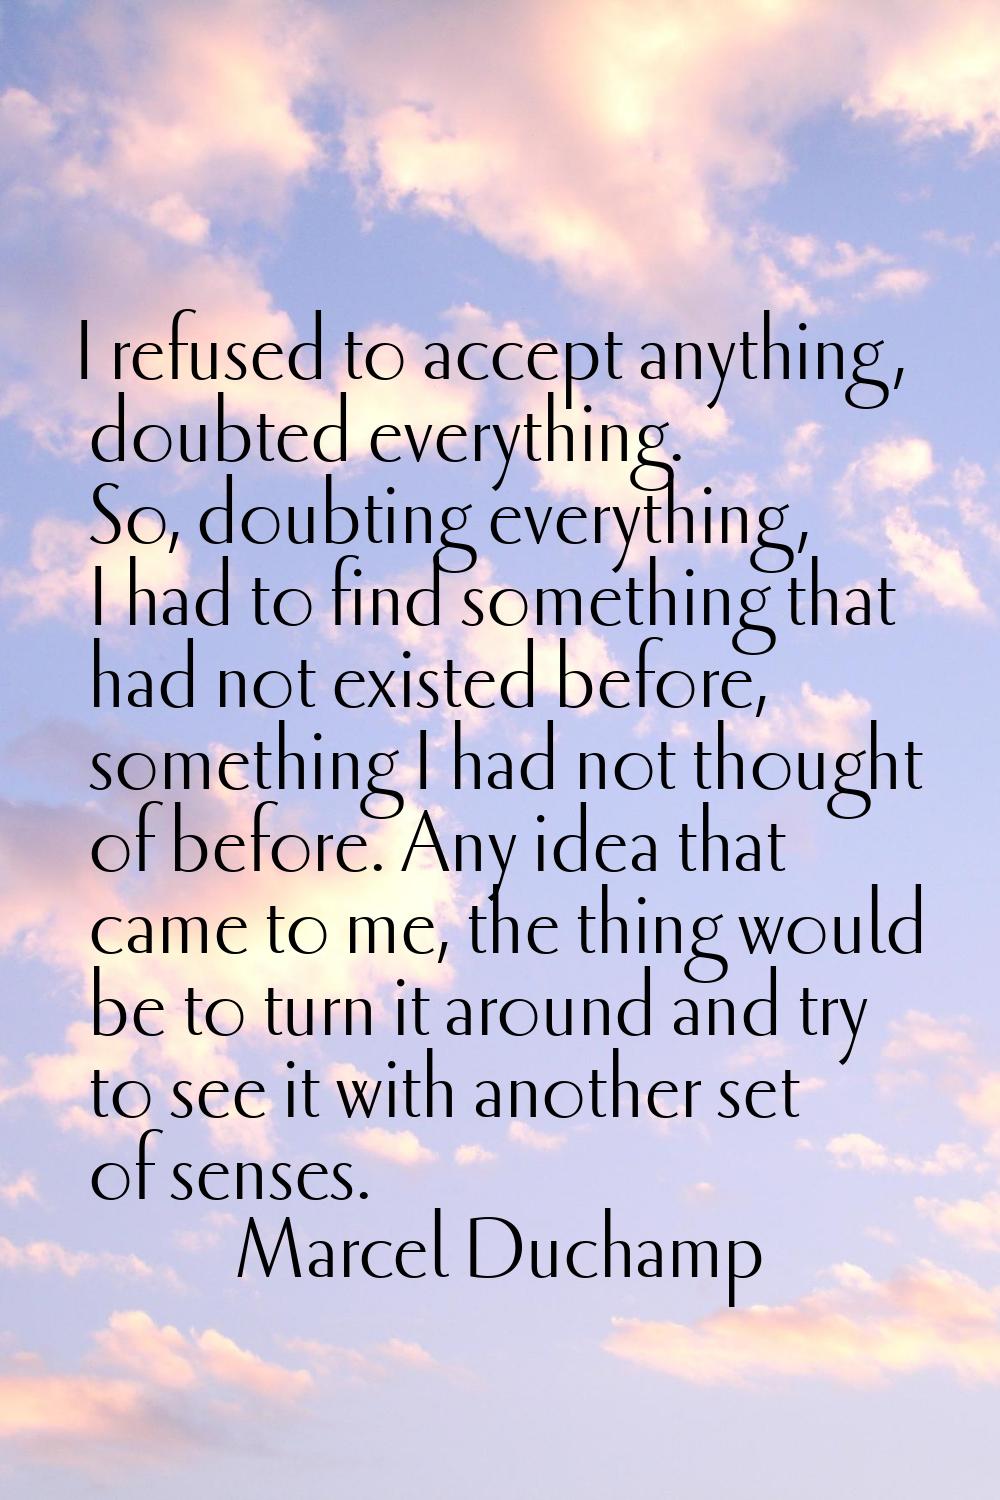 I refused to accept anything, doubted everything. So, doubting everything, I had to find something 